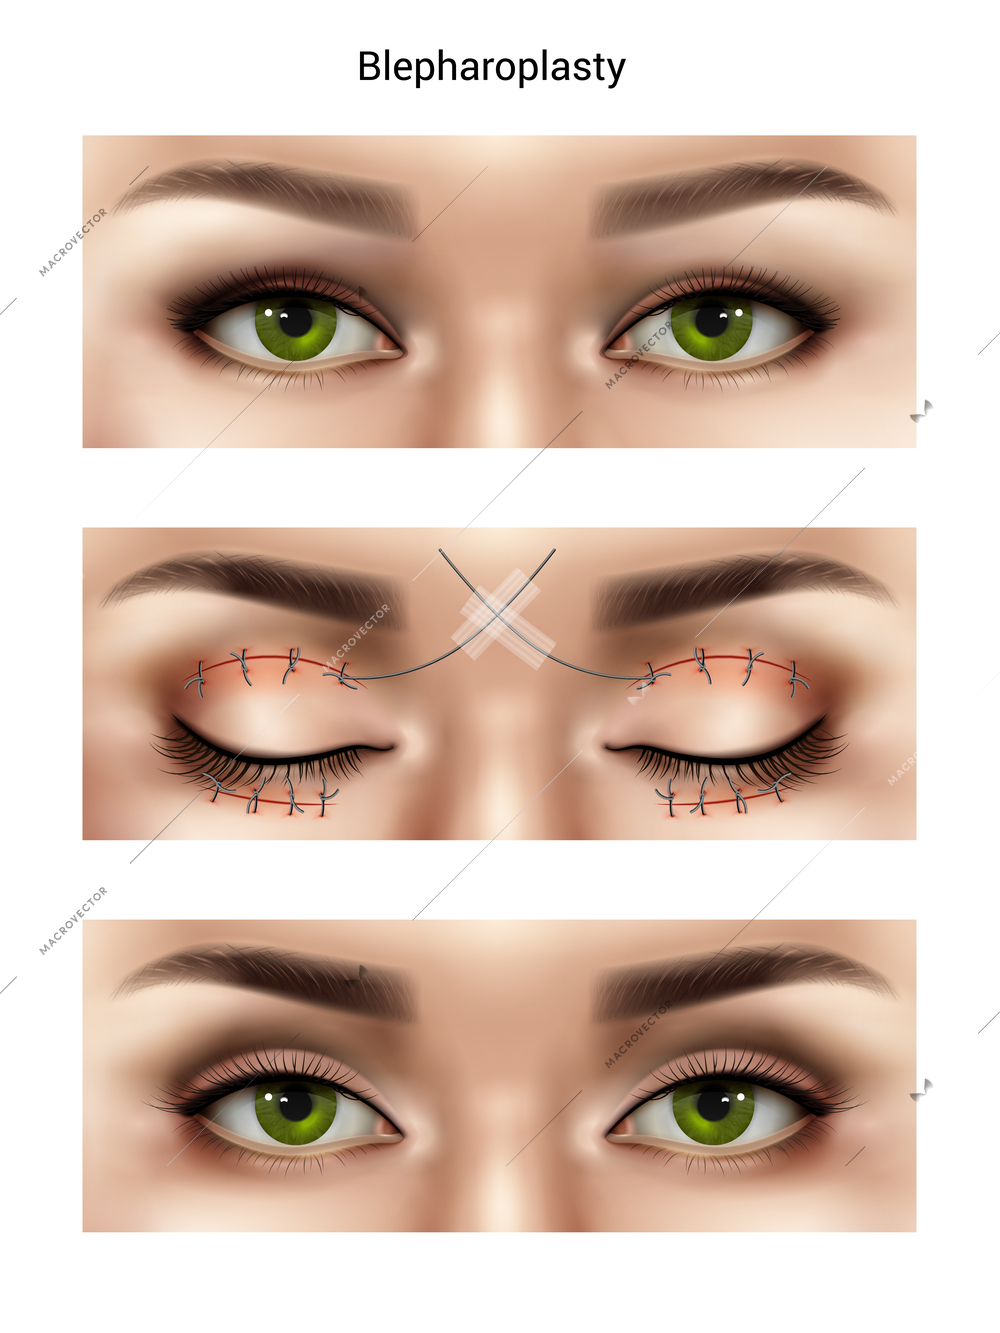 Surgical suture stitches realistic composition with images of female eyes at different stages of blepharoplasty procedures vector illustration